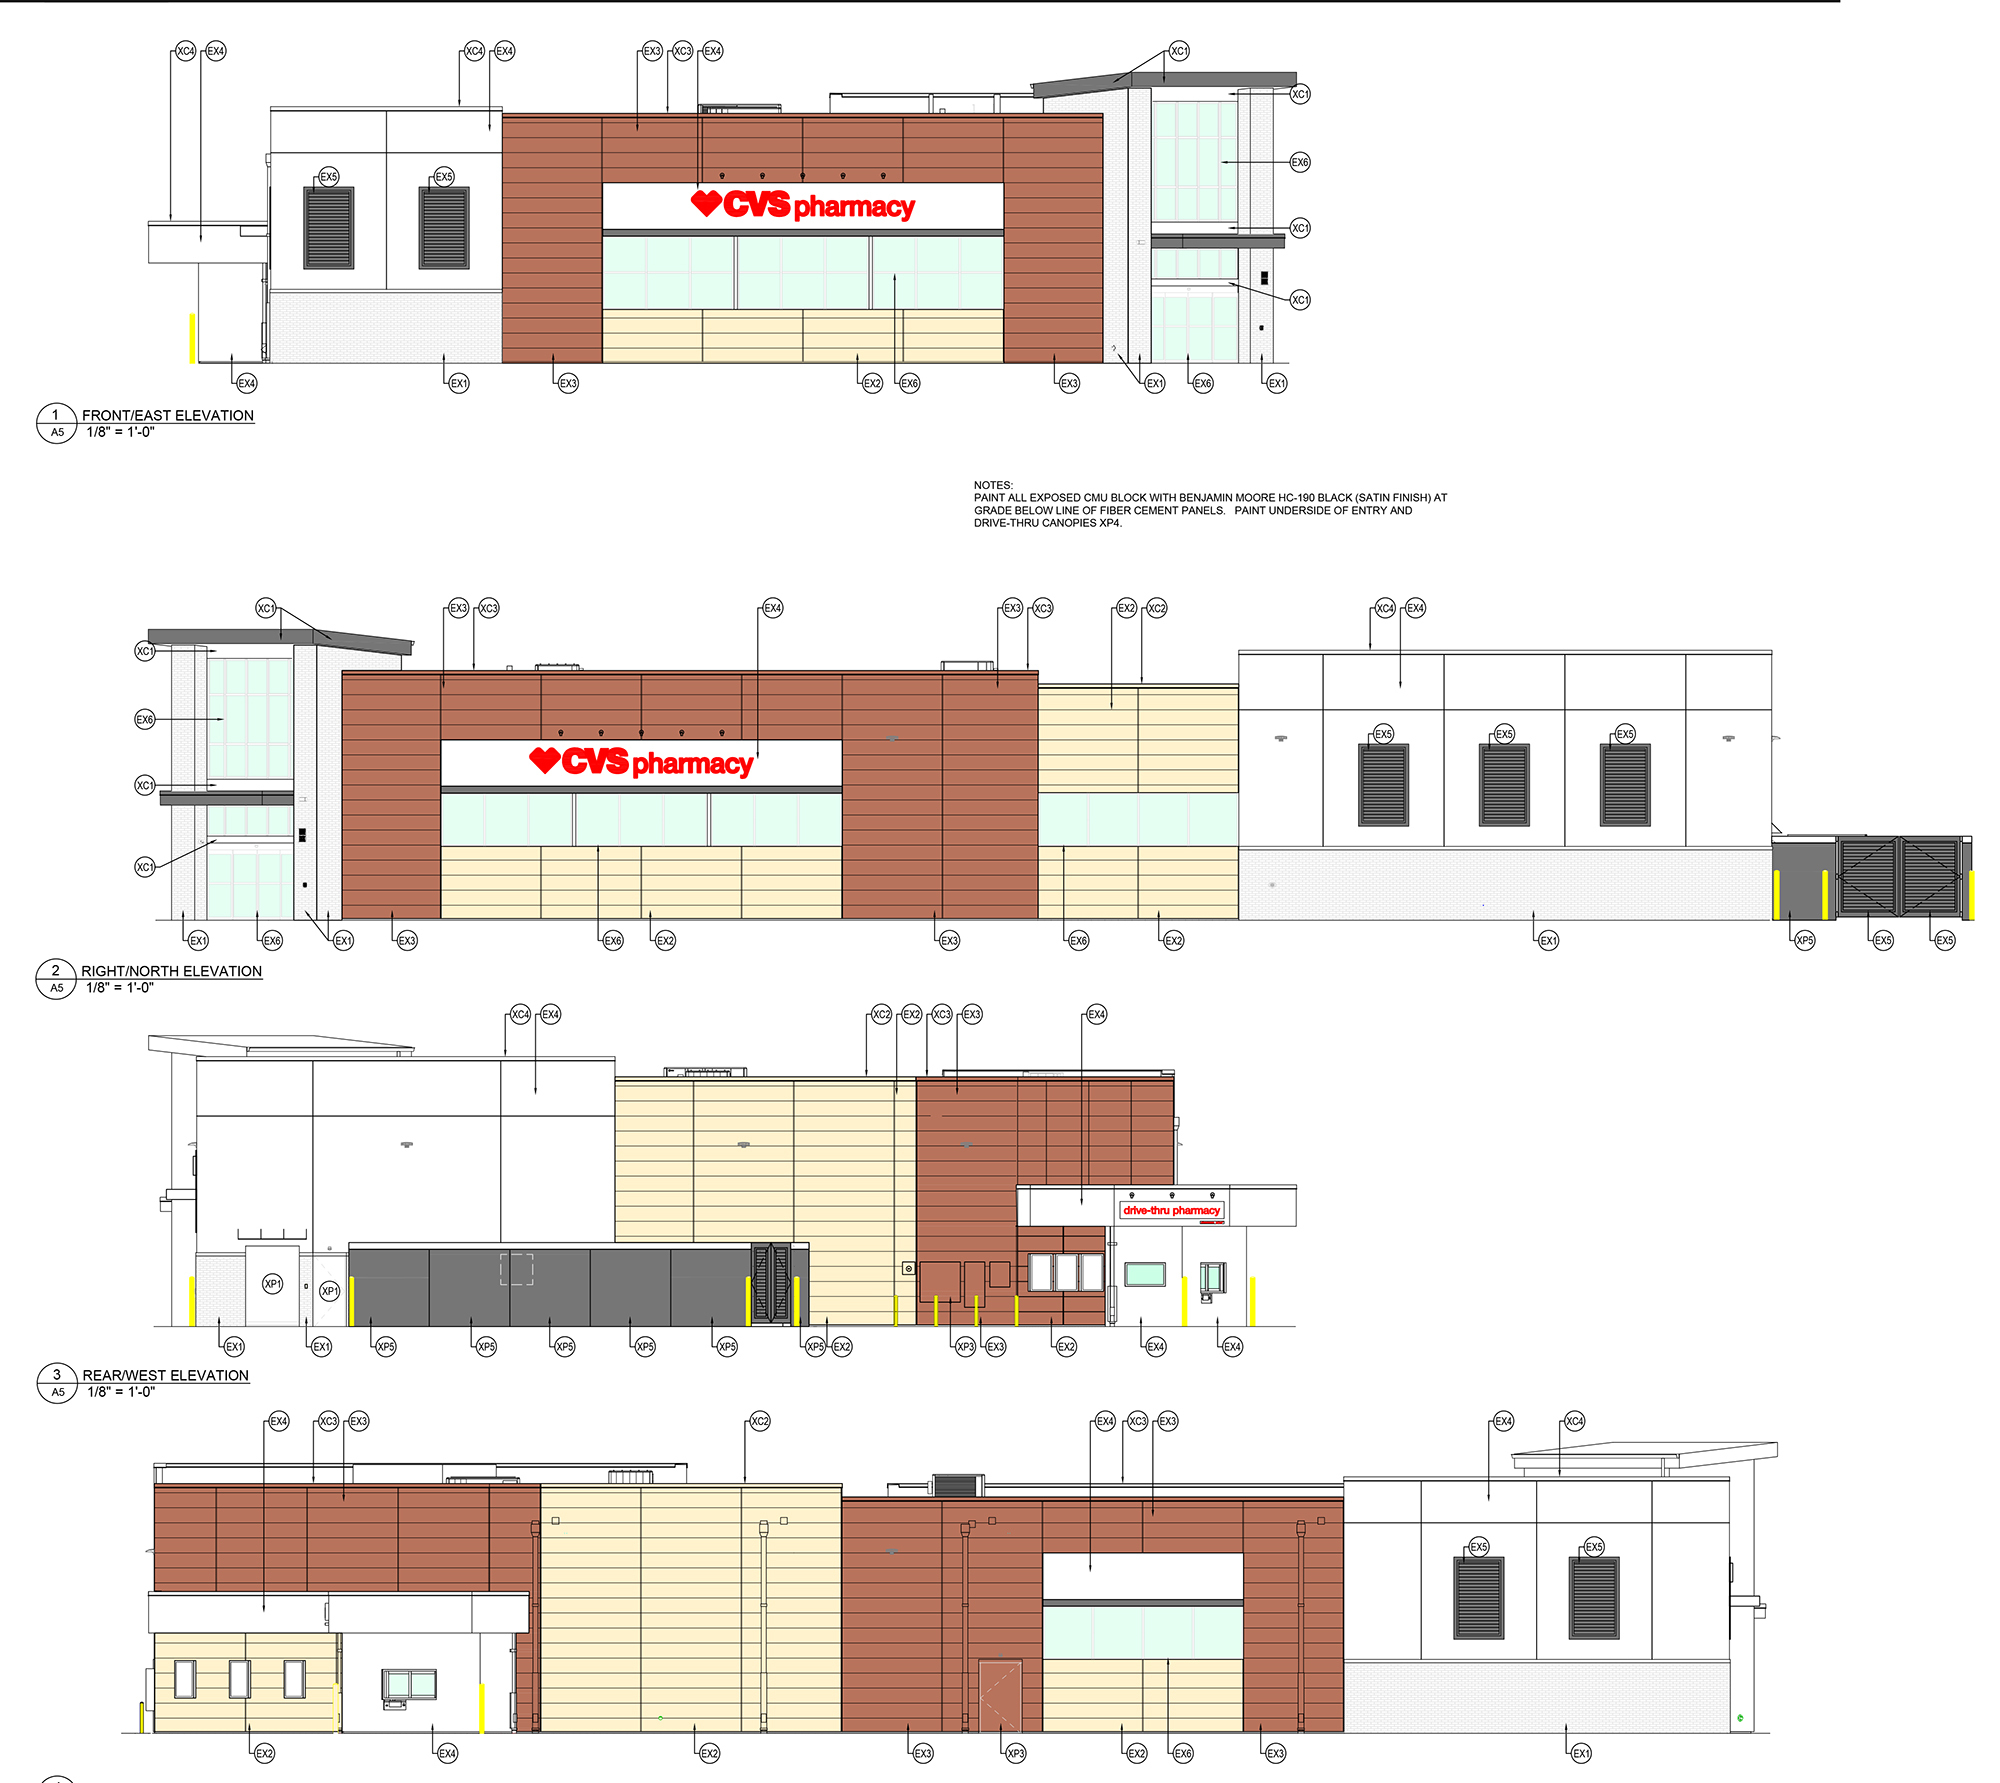 Elevations for the Nocatee CVS.